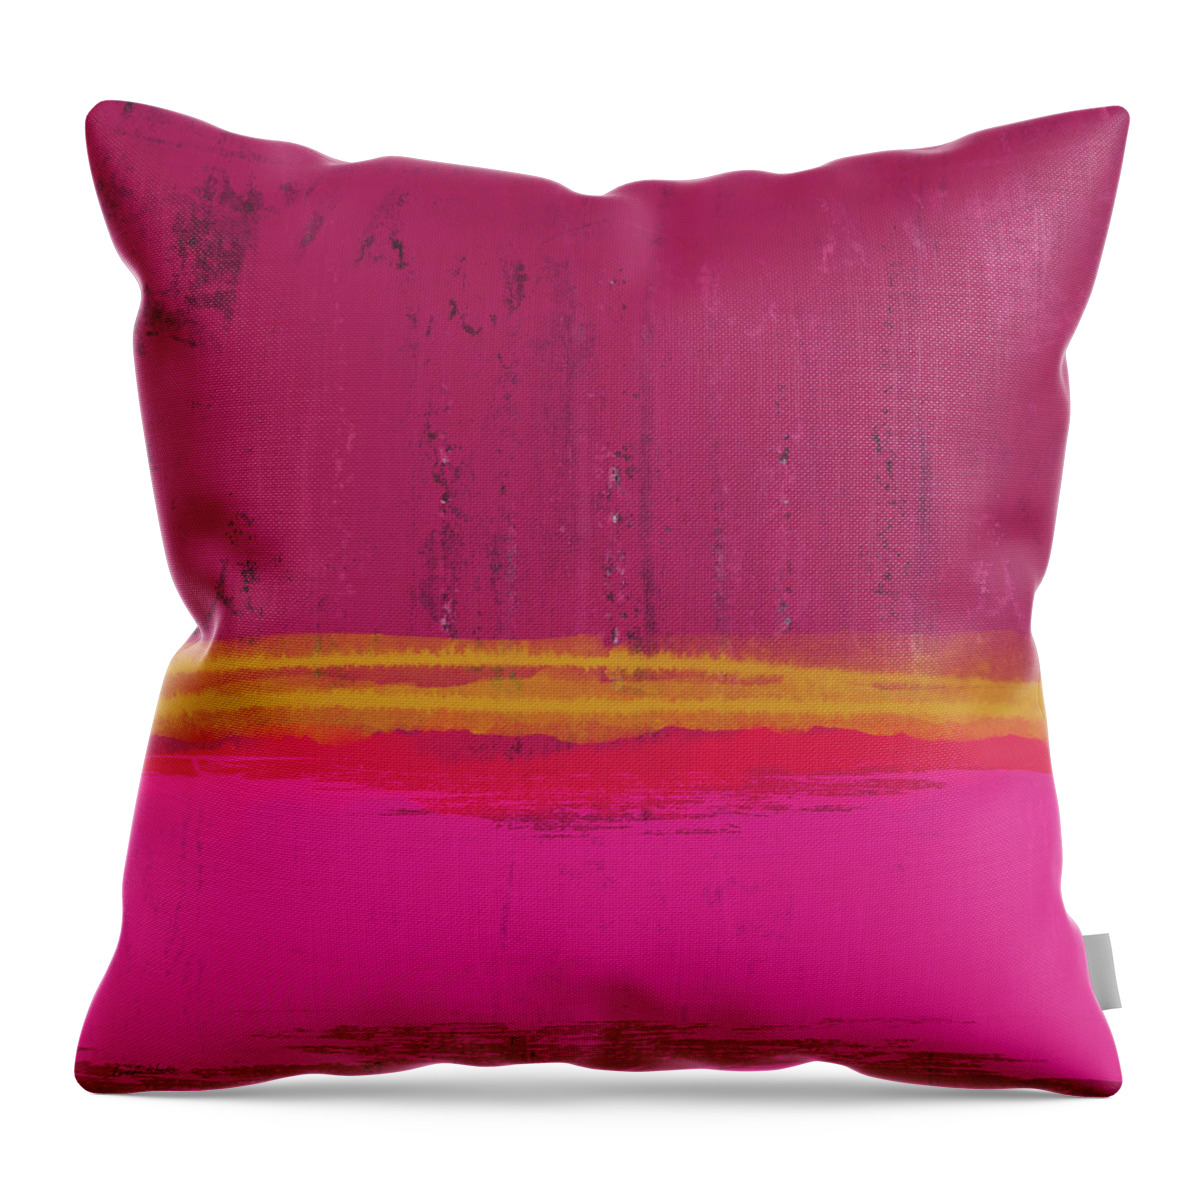 Abstract Landscape Pink Red Yellow Hot Pink Vibrant Color Blockmodern Contemporary Square Lines Loft Art Home Decorairbnb Decorliving Room Artbedroom Artcorporate Artset Designgallery Wallart By Linda Woodsart For Interior Designersgreeting Cardpillowtotehospitality Arthotel Artart Licensing Throw Pillow featuring the mixed media Undaunted Pink Abstract- Art by Linda Woods by Linda Woods